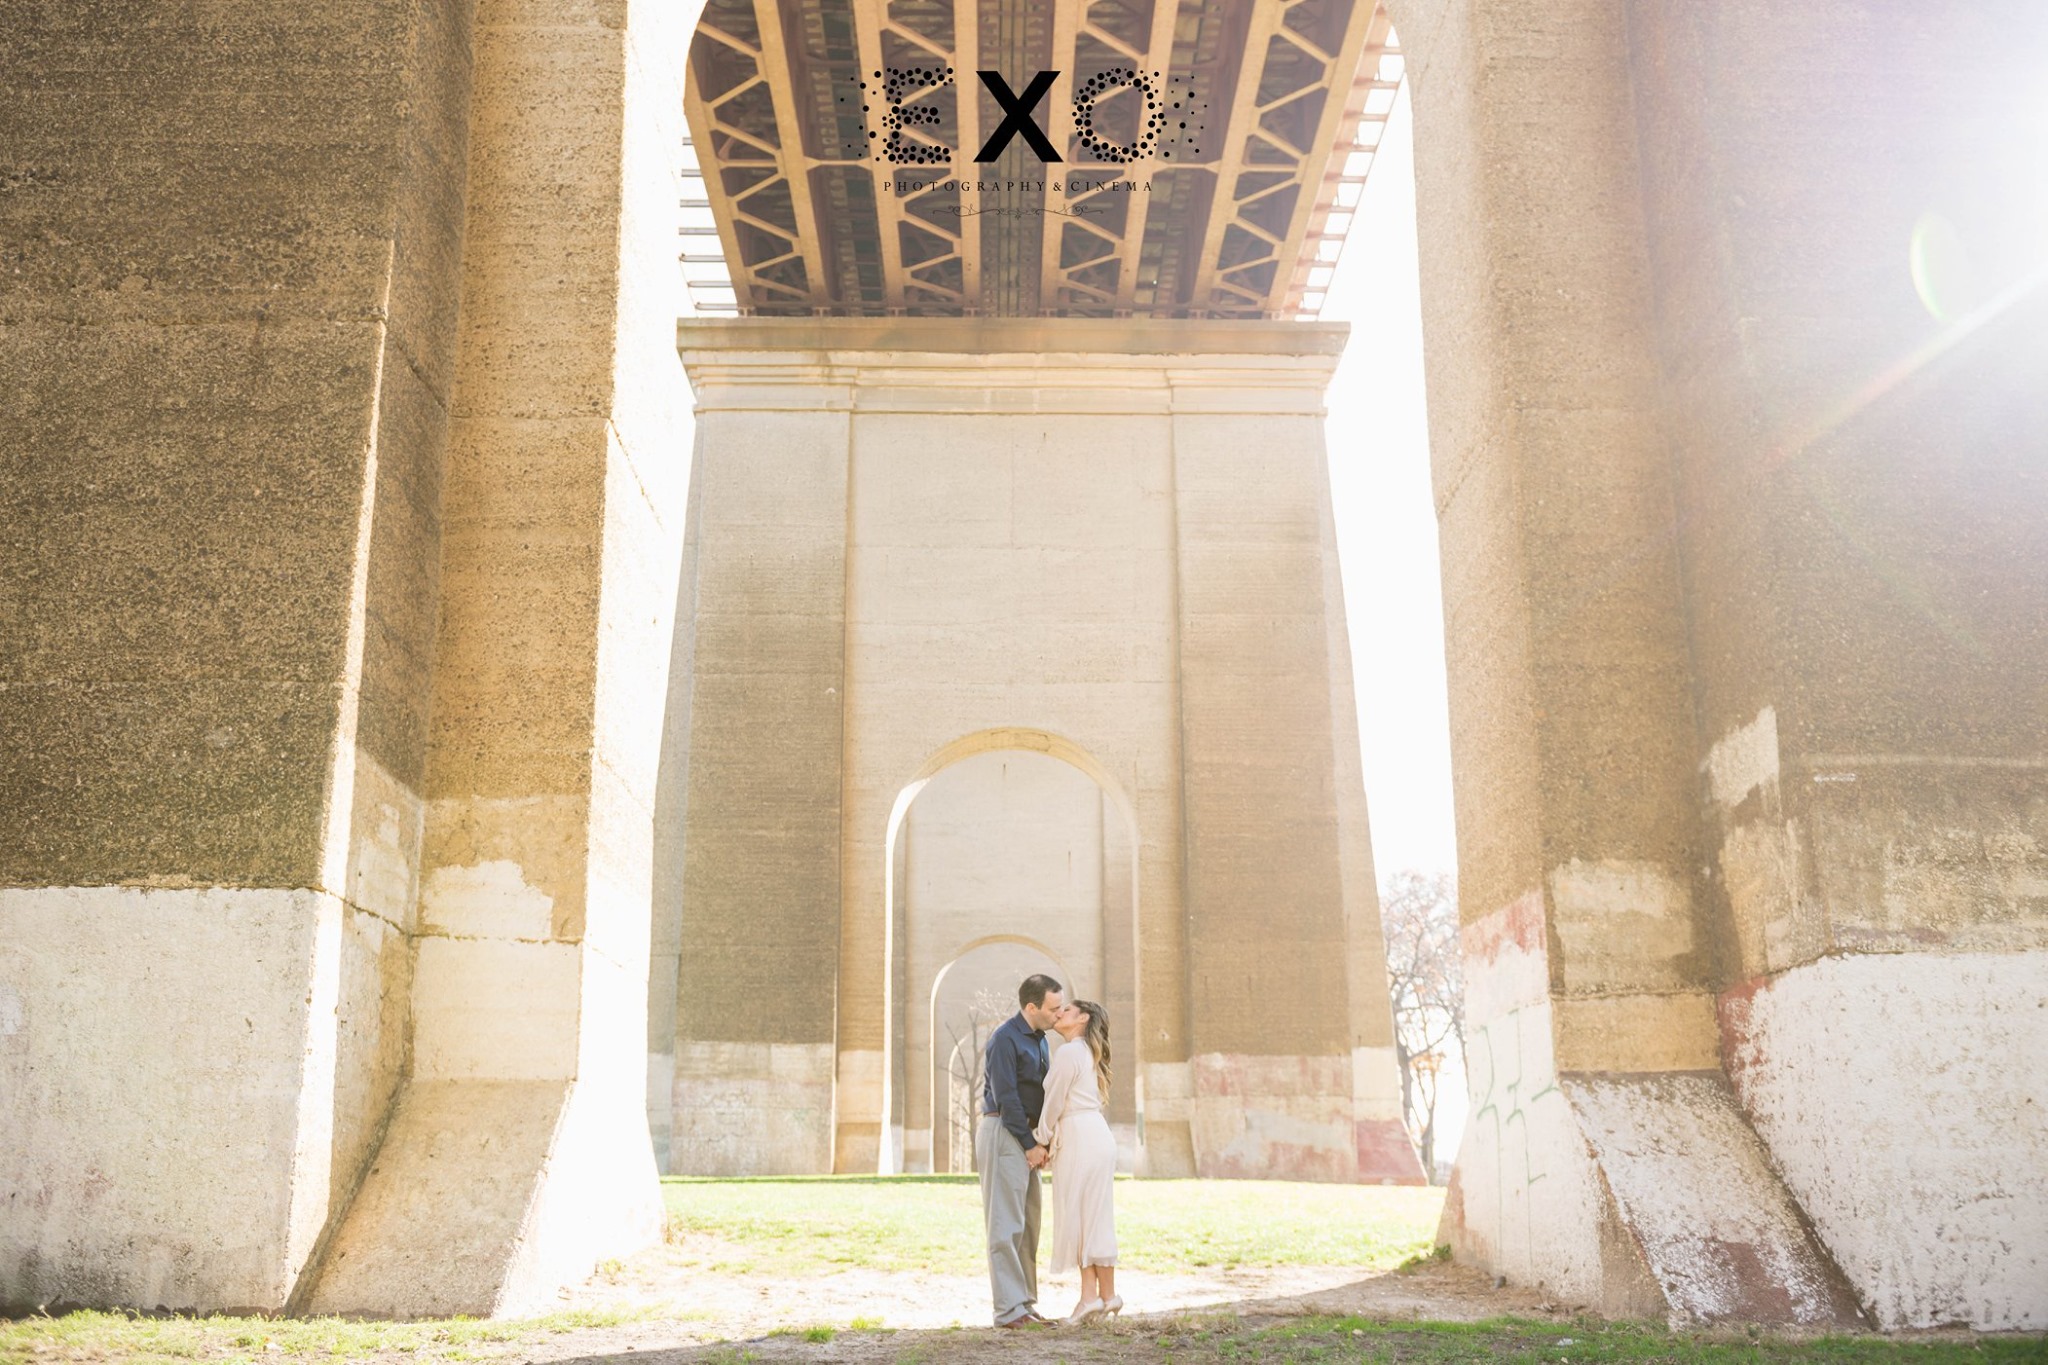 couple kissing under the archway in Astoria Park